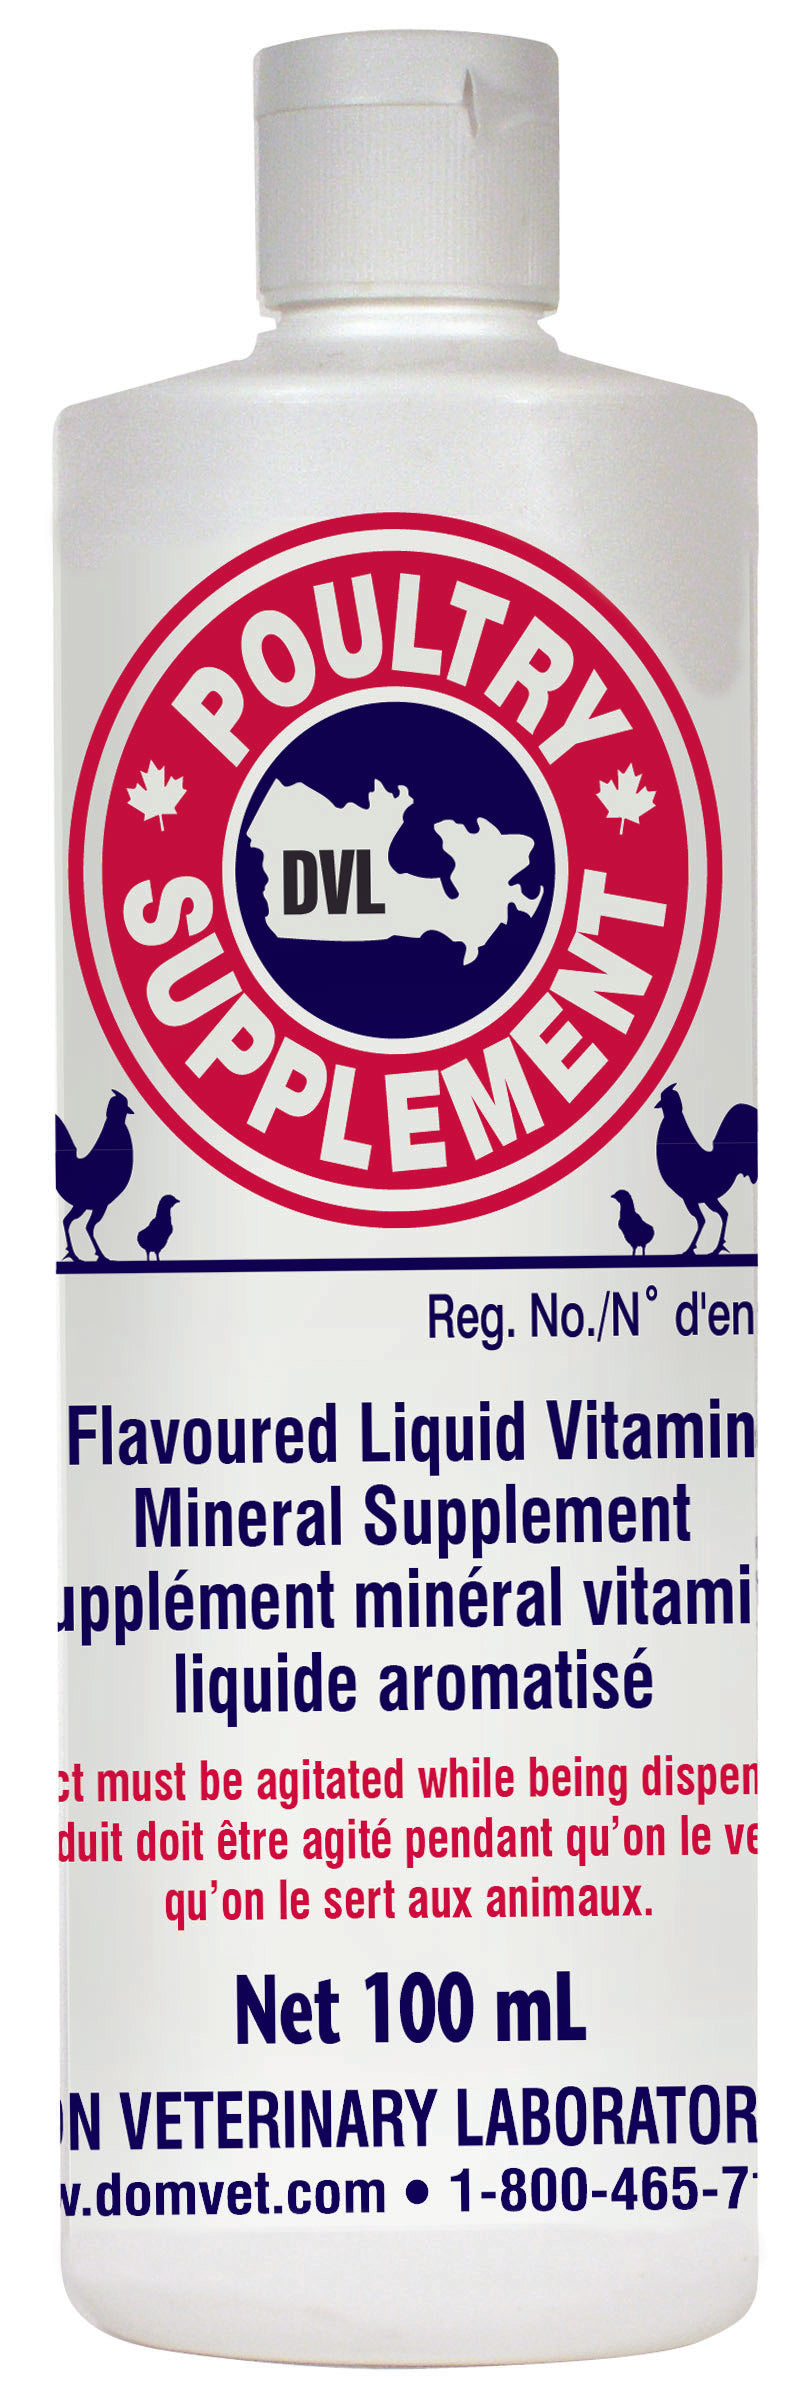 POULTRY LIQUID SUPPLEMENT 100L Poultry Supply supplement for broilers